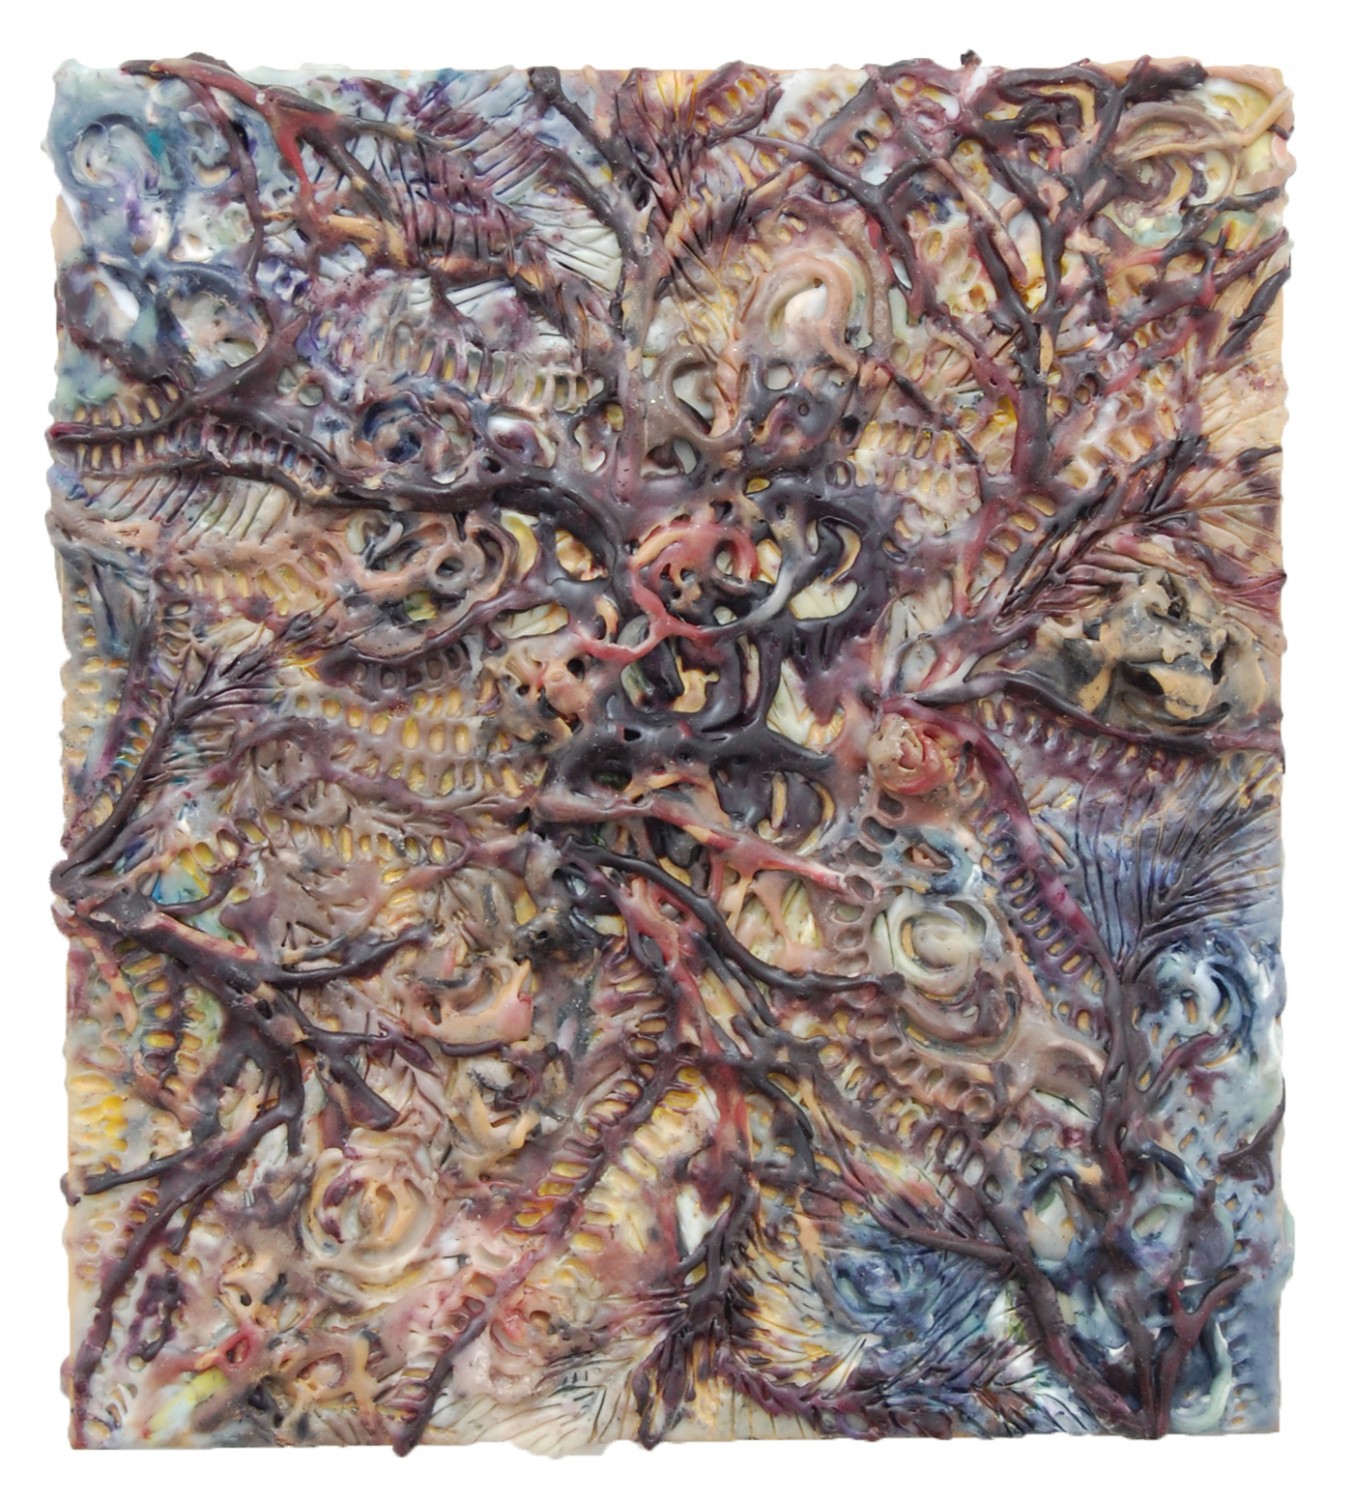 Annelida, 2012, encaustic on panel, 9 x 8 inches